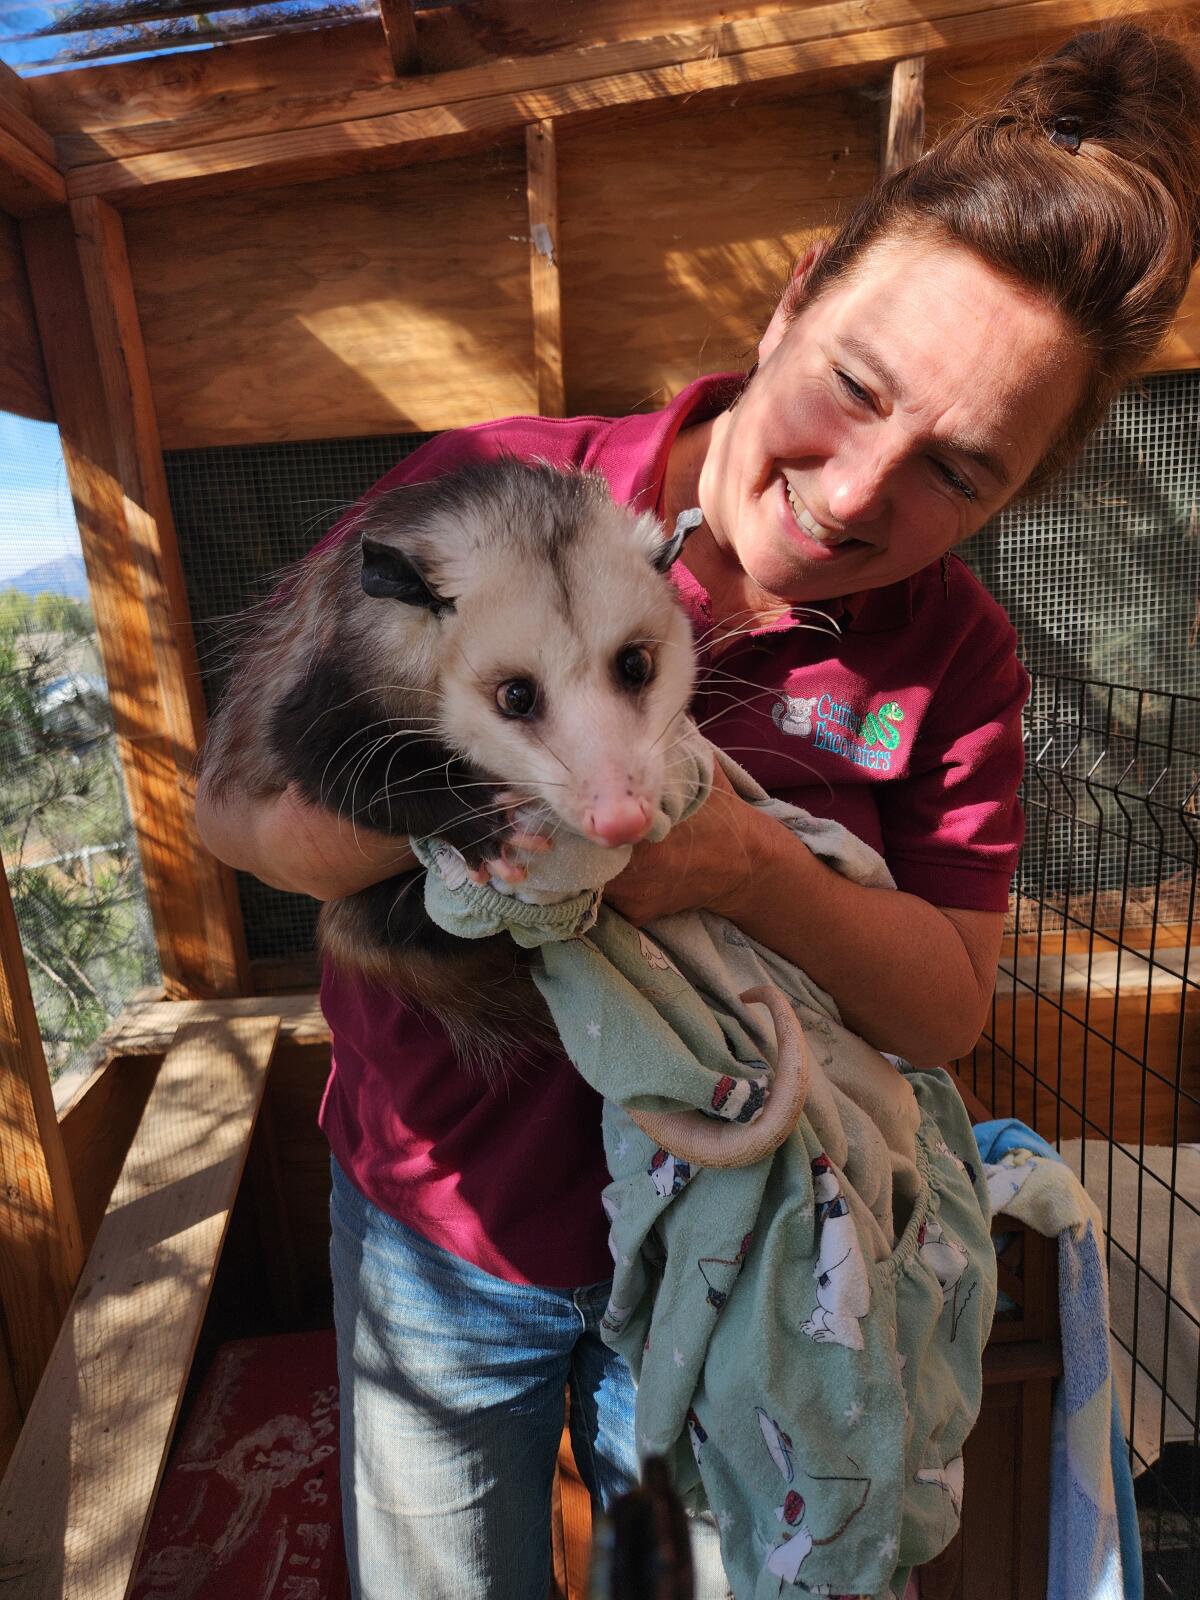 Opposums are one of Andrea Burgan's favorite animals, she said.